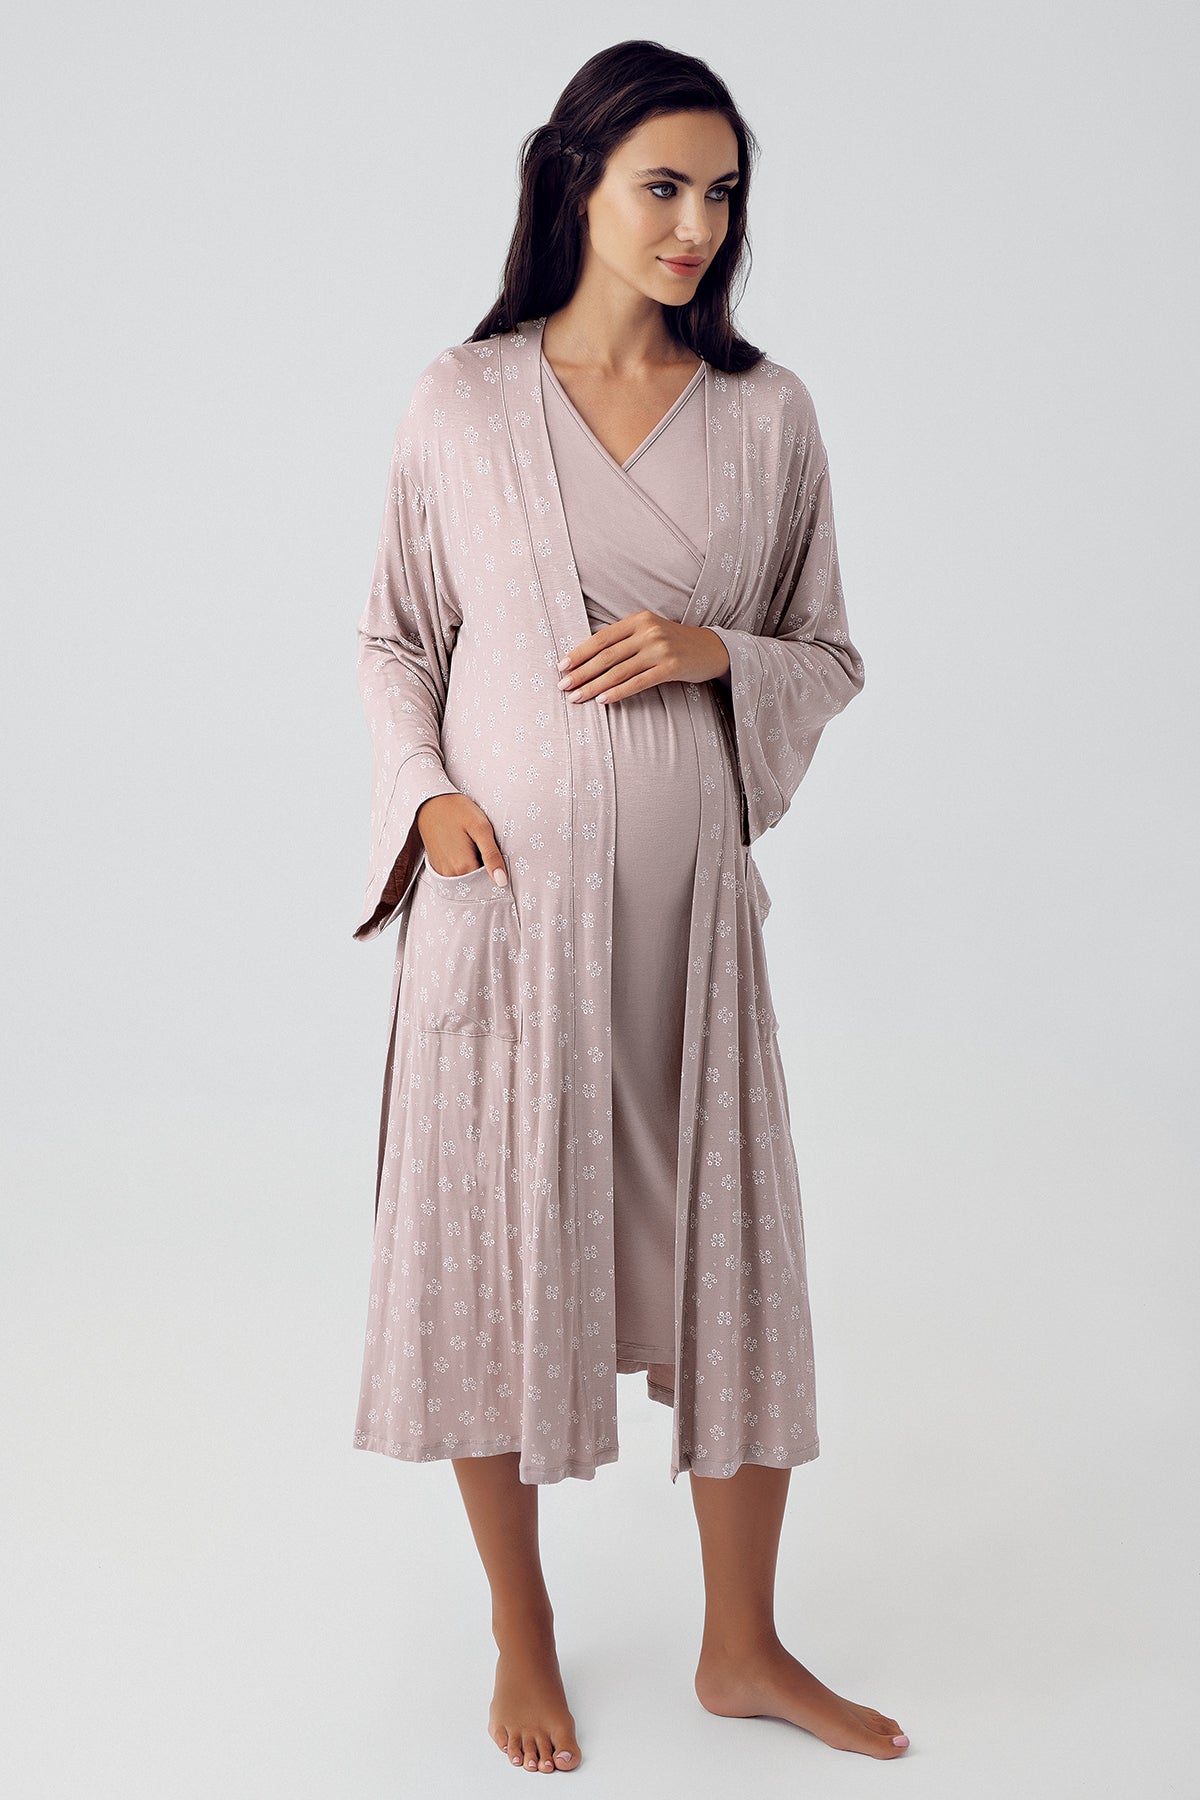 Shopymommy 15405 Cross Double Breasted Maternity & Nursing Nightgown With Patterned Robe Coffee